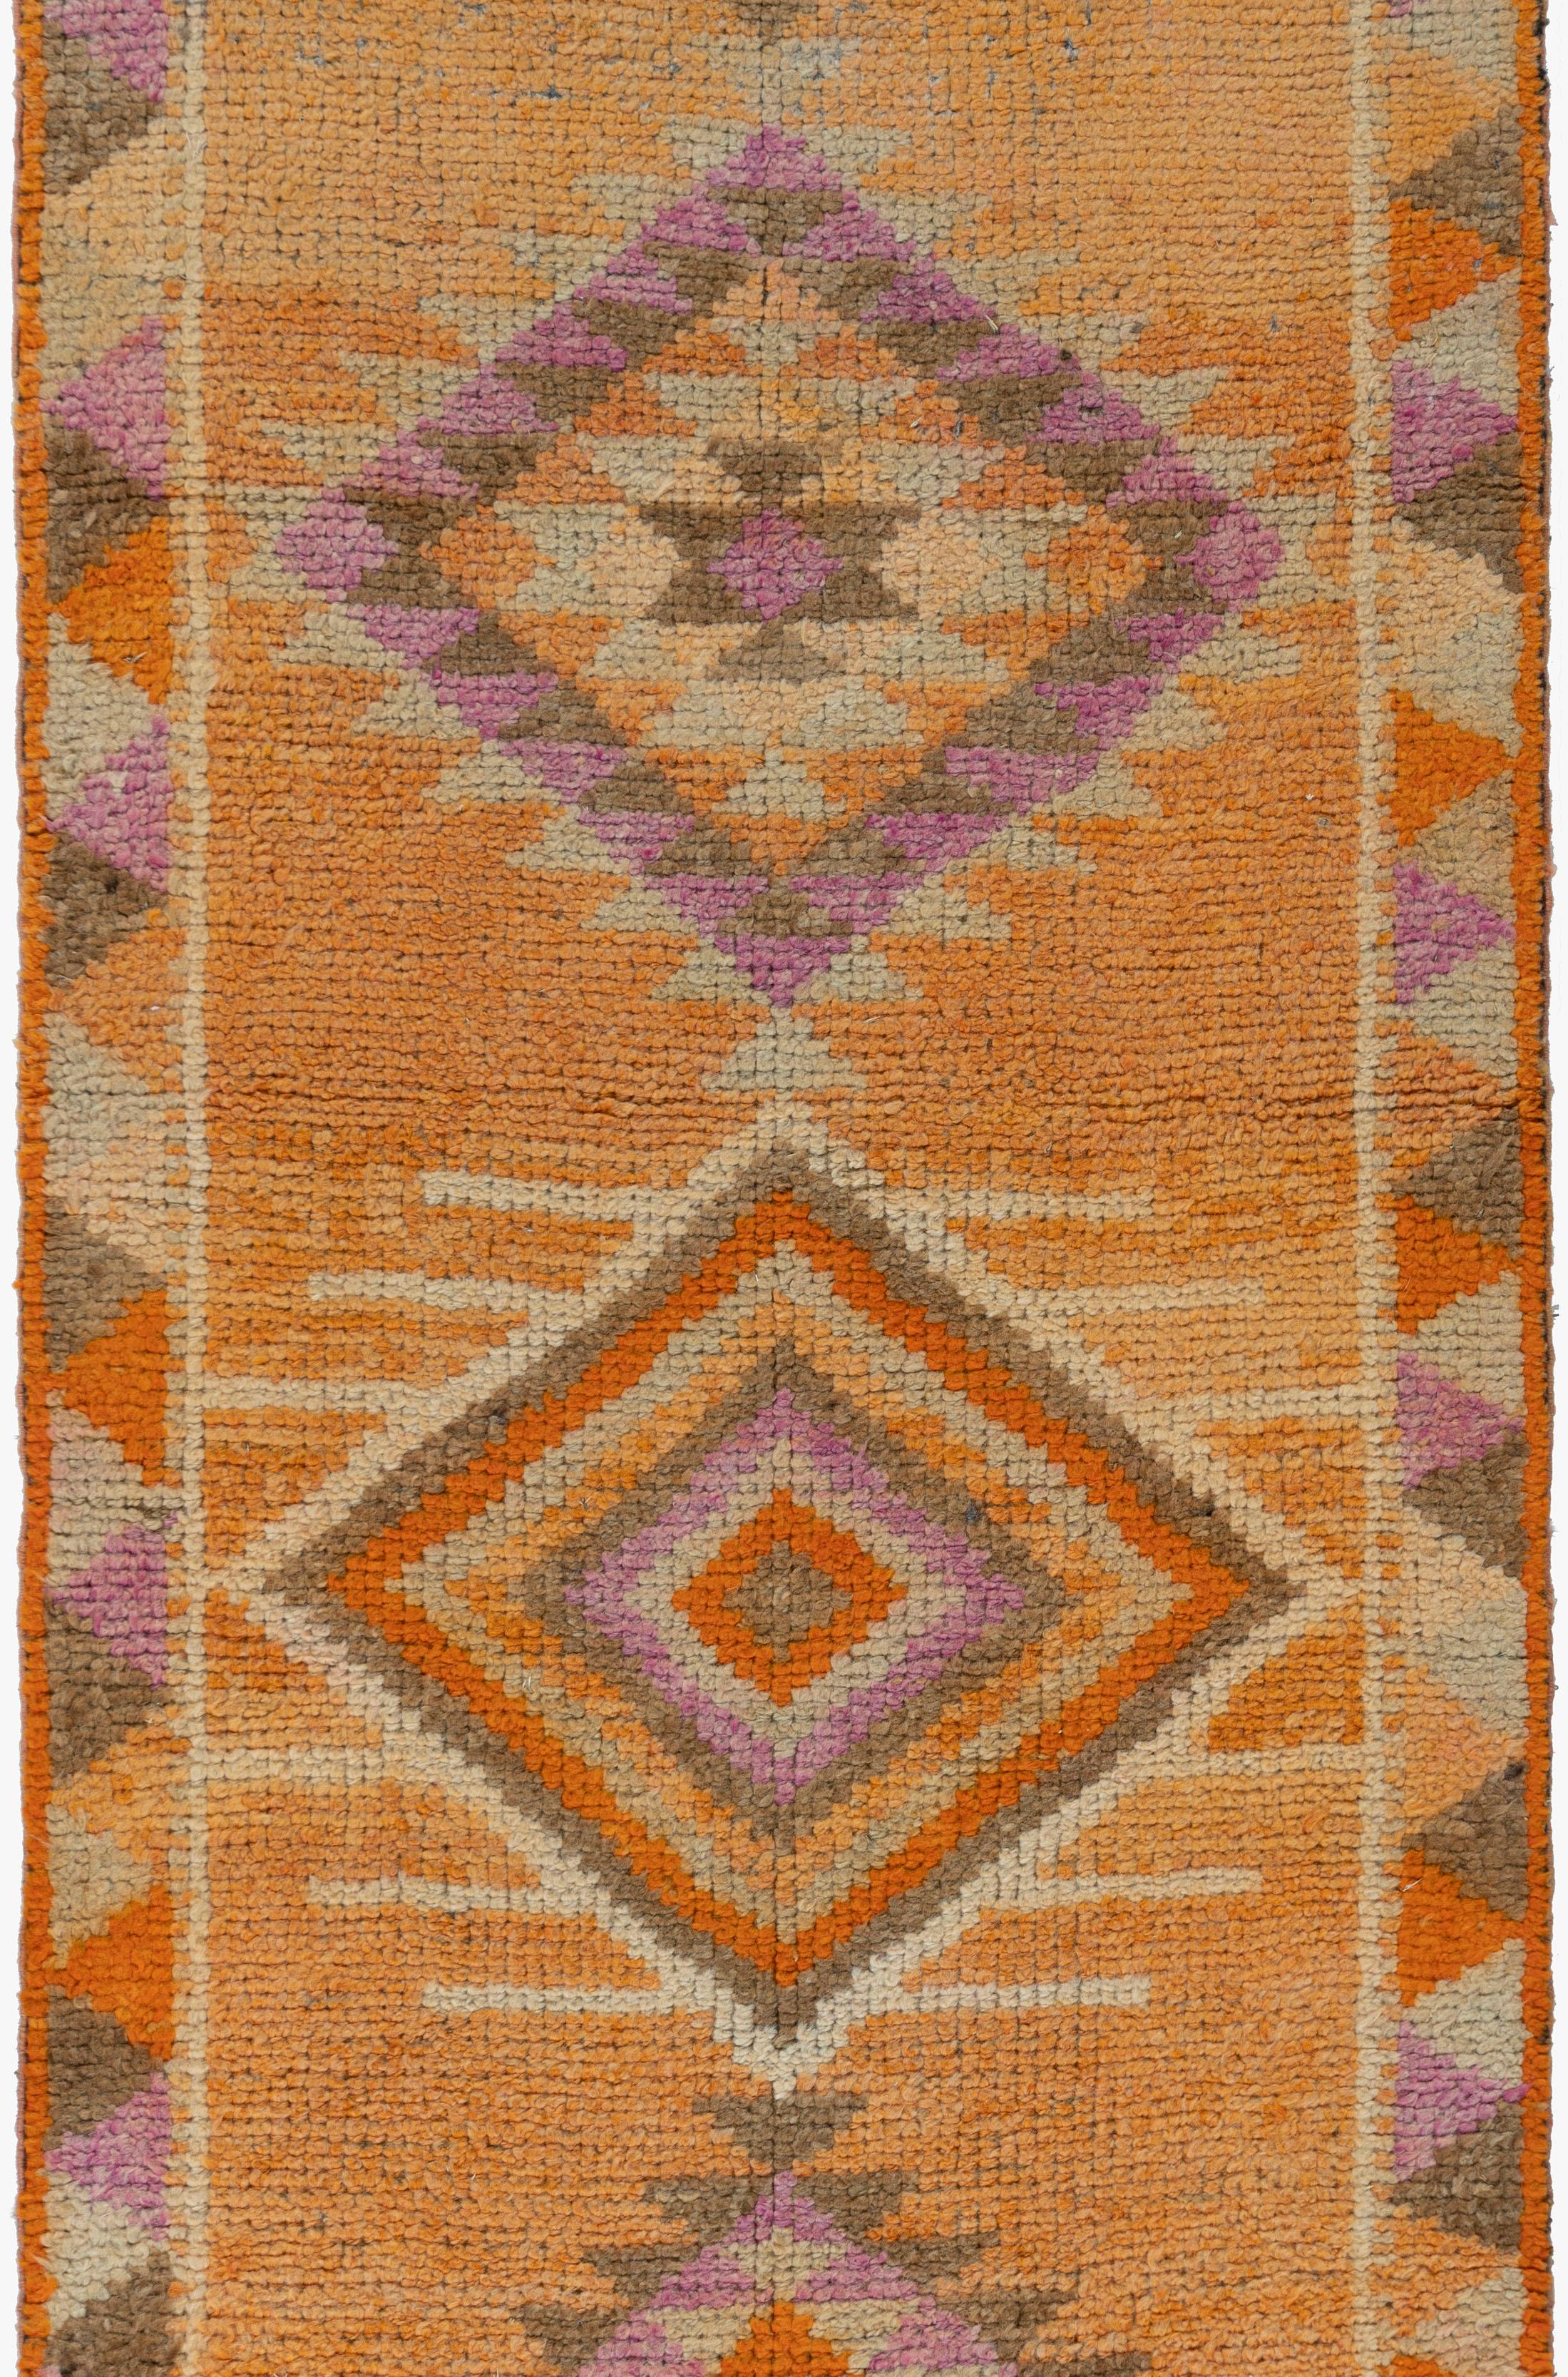 Vintage Turkish Oushak Runner 2'8 x 11'7. Hand-woven in Turkey where rug weaving is the culture rather than a business. Rugs from Turkey are known for the high quality of their wool their beautiful patterns and warm colors. These designer favorites